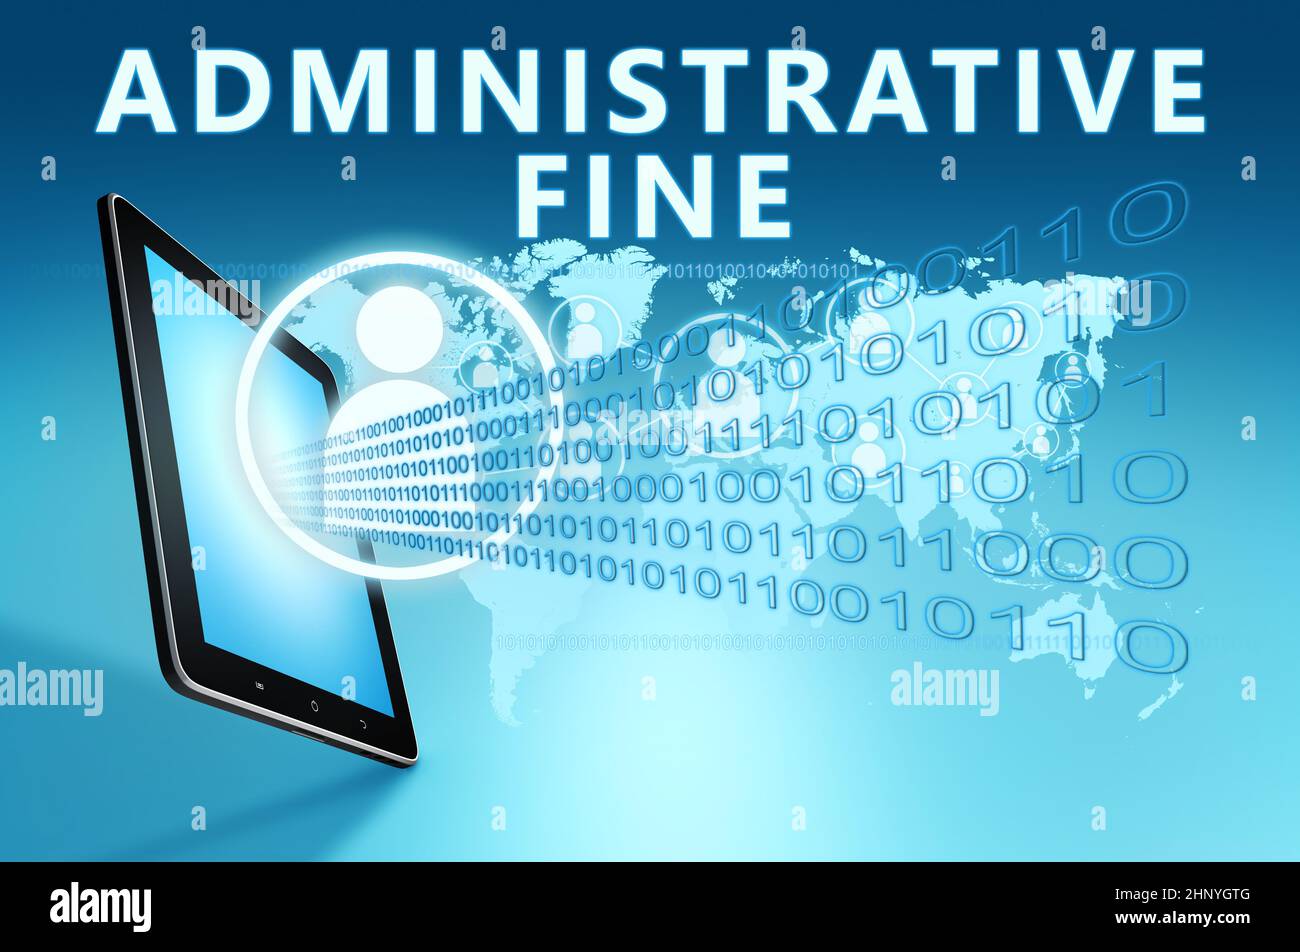 Administrative Fine - text concept with tablet computer on blue wolrd map background - 3d render illustration. Stock Photo